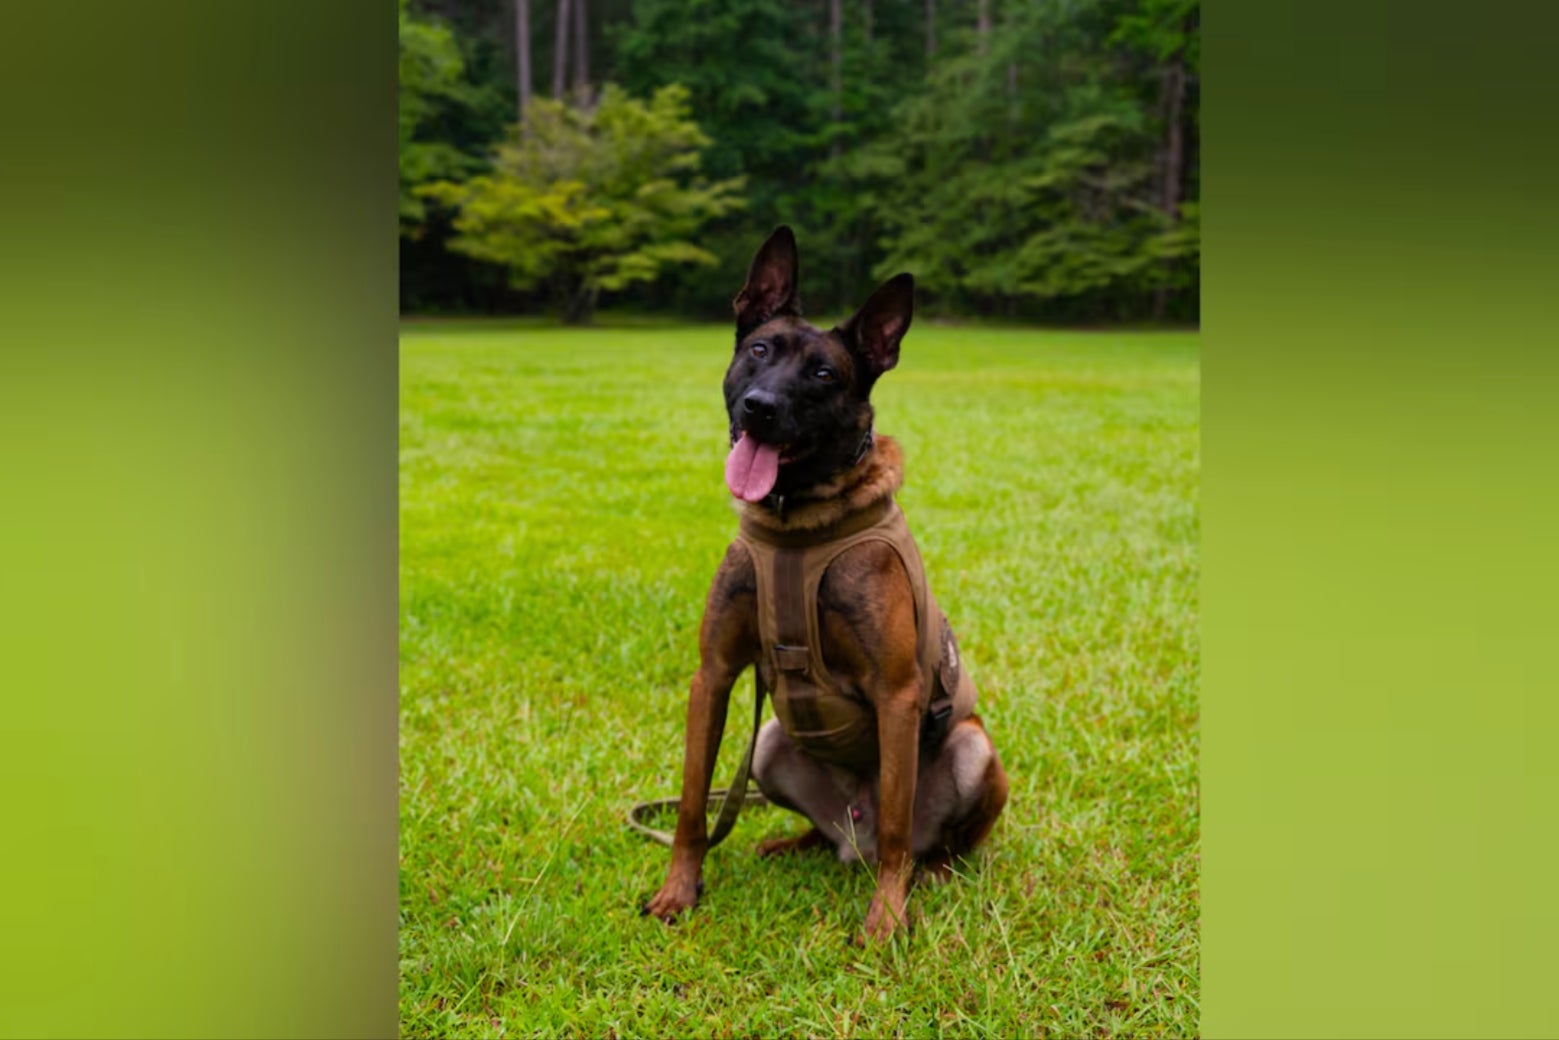 K9 officer Coba was shot dead in South Carolina as police tried to serve an arrest warrant